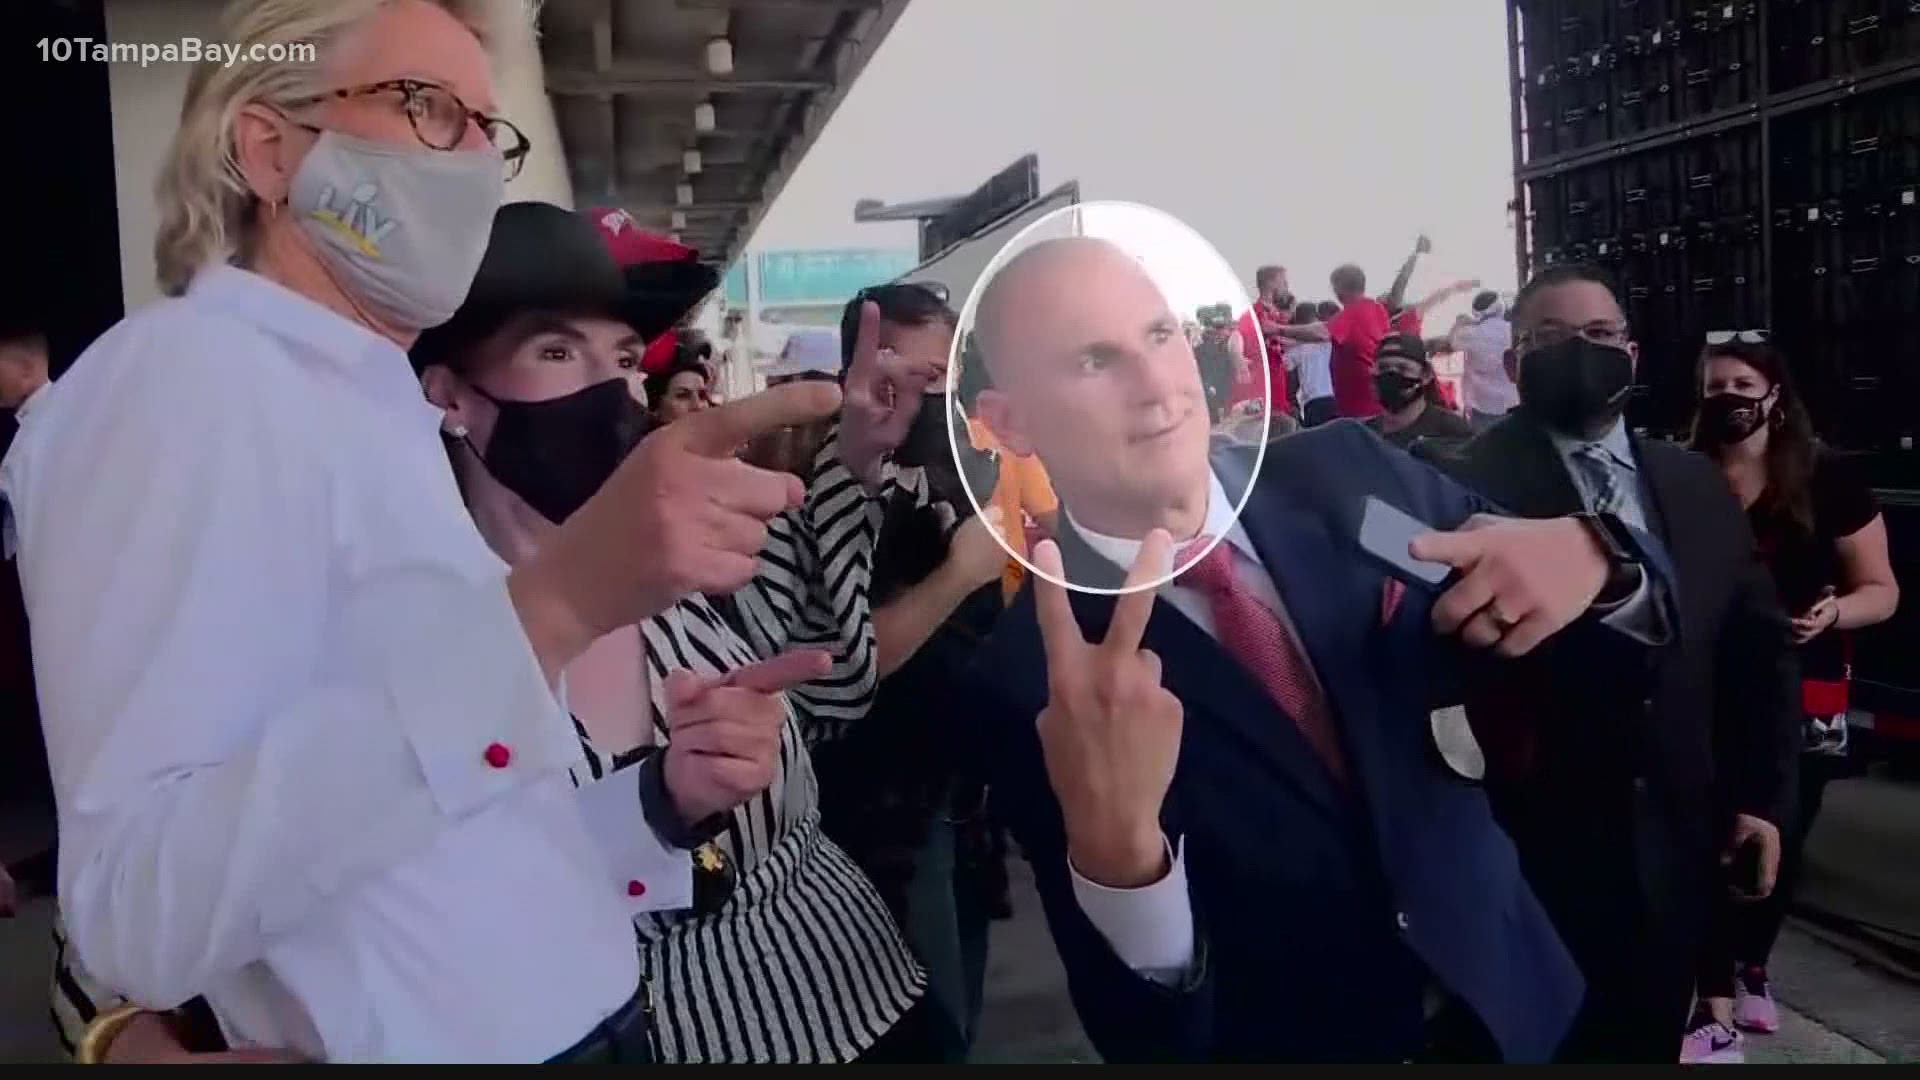 10 Tampa Bay cameras caught Hillsborough Superintendent Addison Davis not wearing a mask in the crowded area of Port Tampa Bay after the Super Bowl parade.